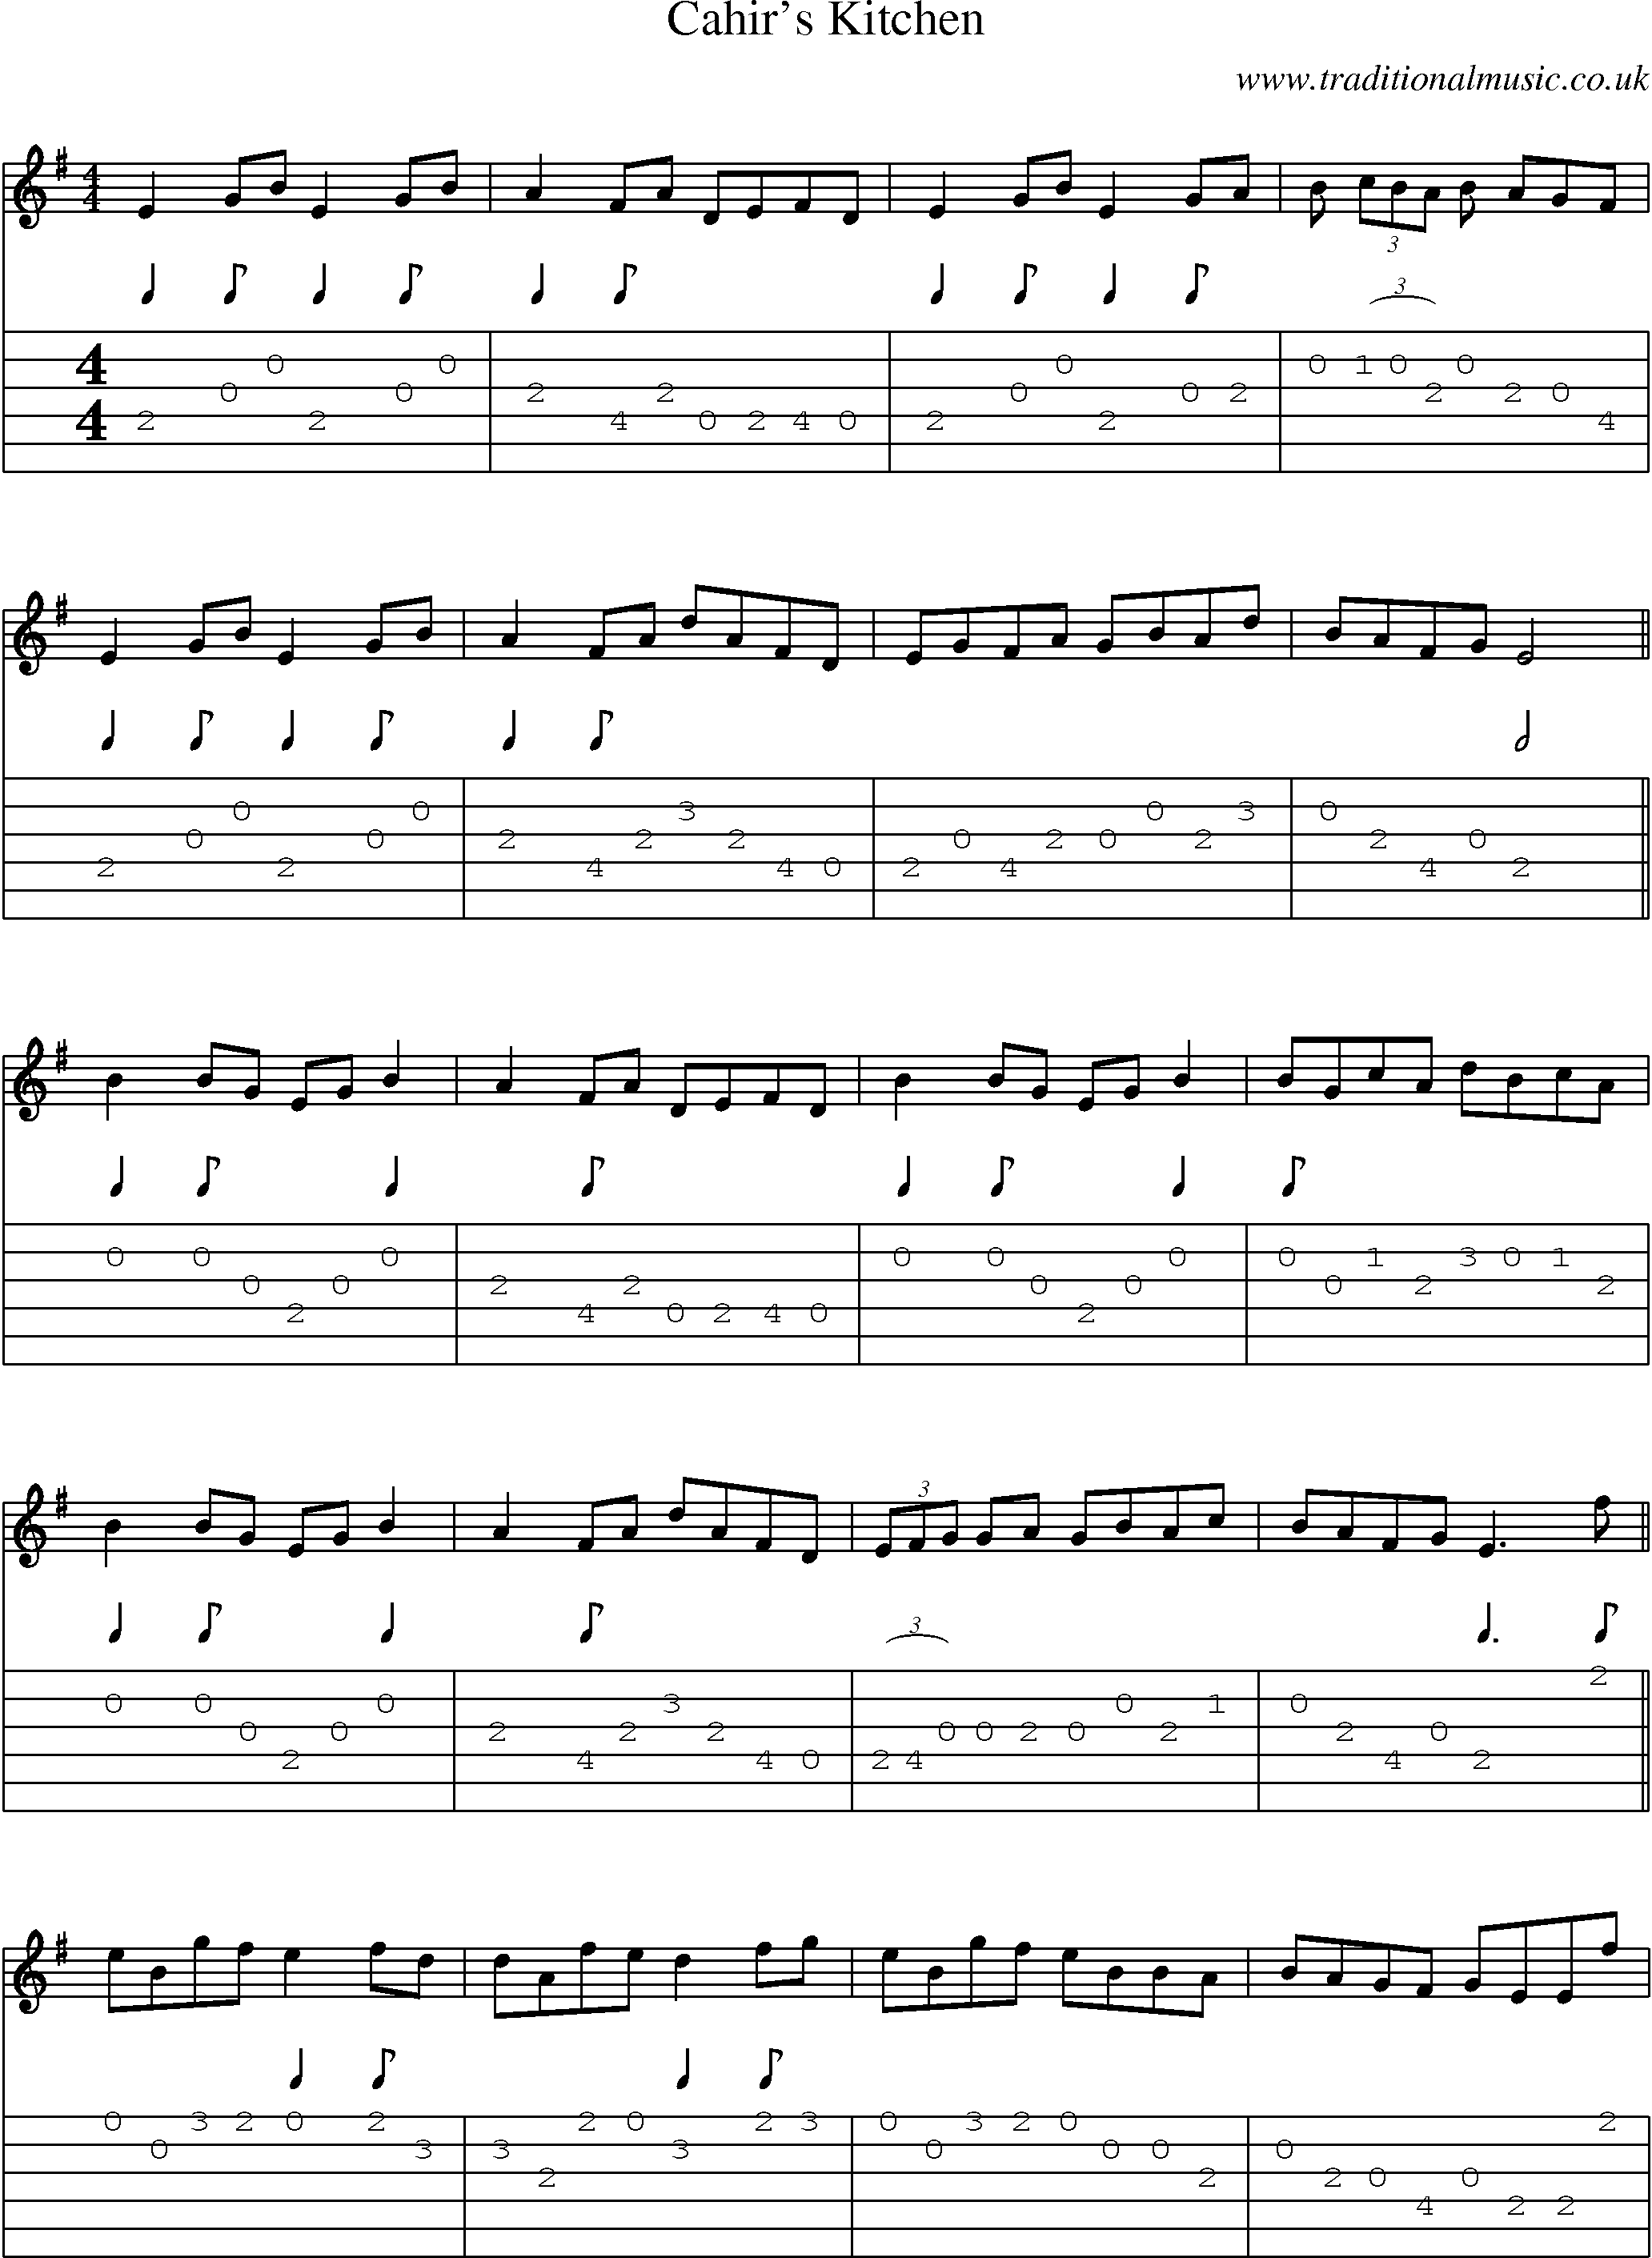 Music Score and Guitar Tabs for Cahirs Kitchen